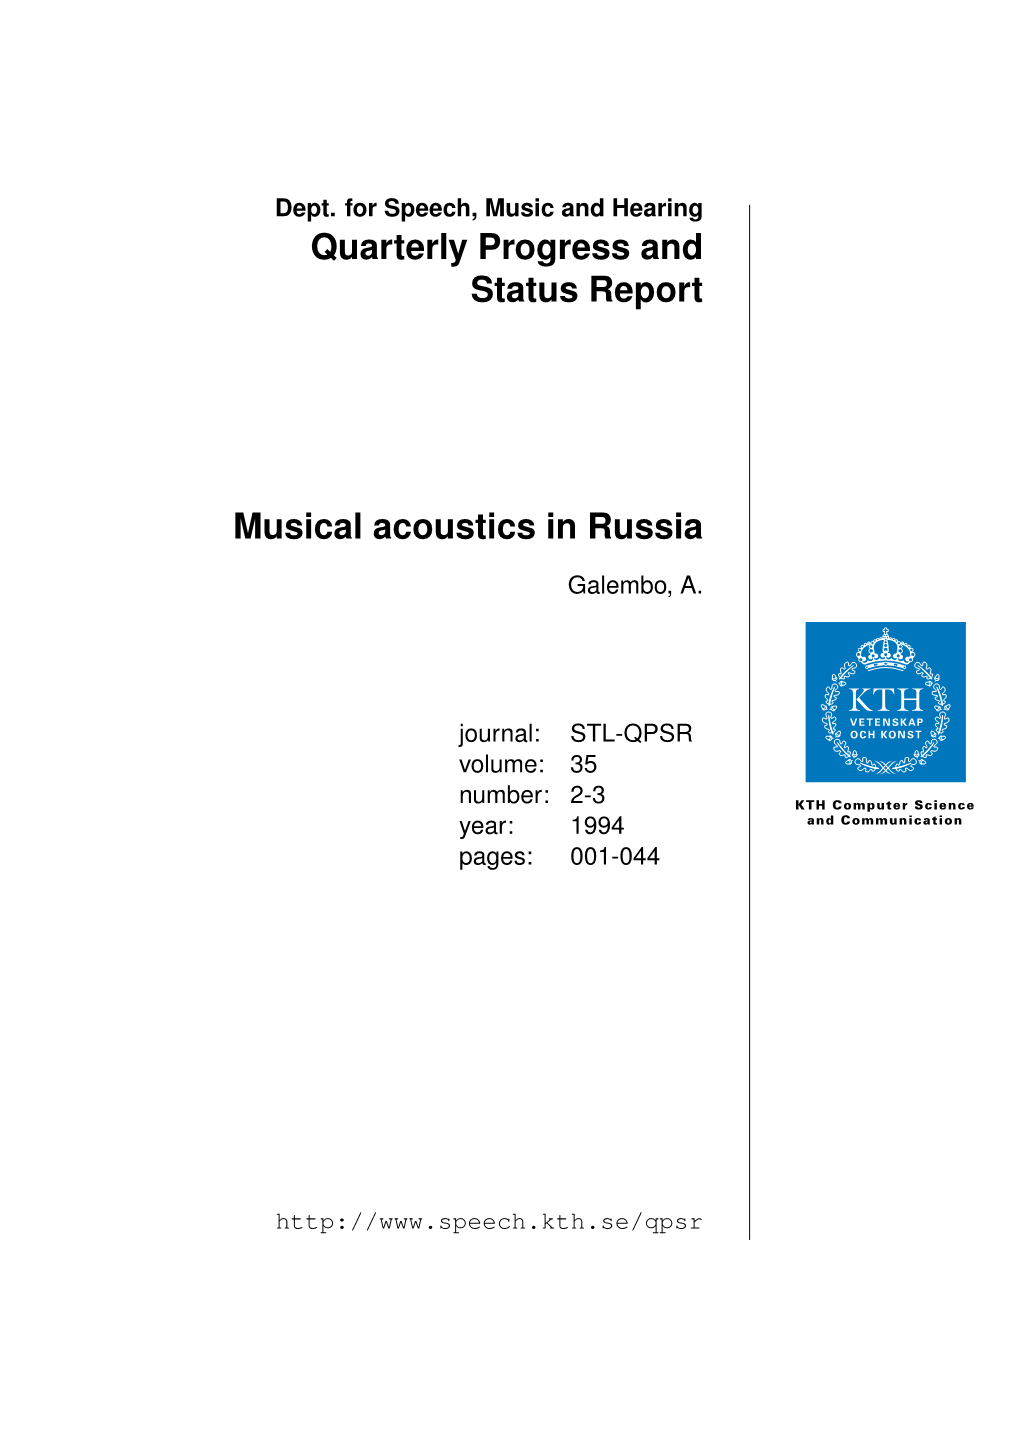 Musical Acoustics in Russia